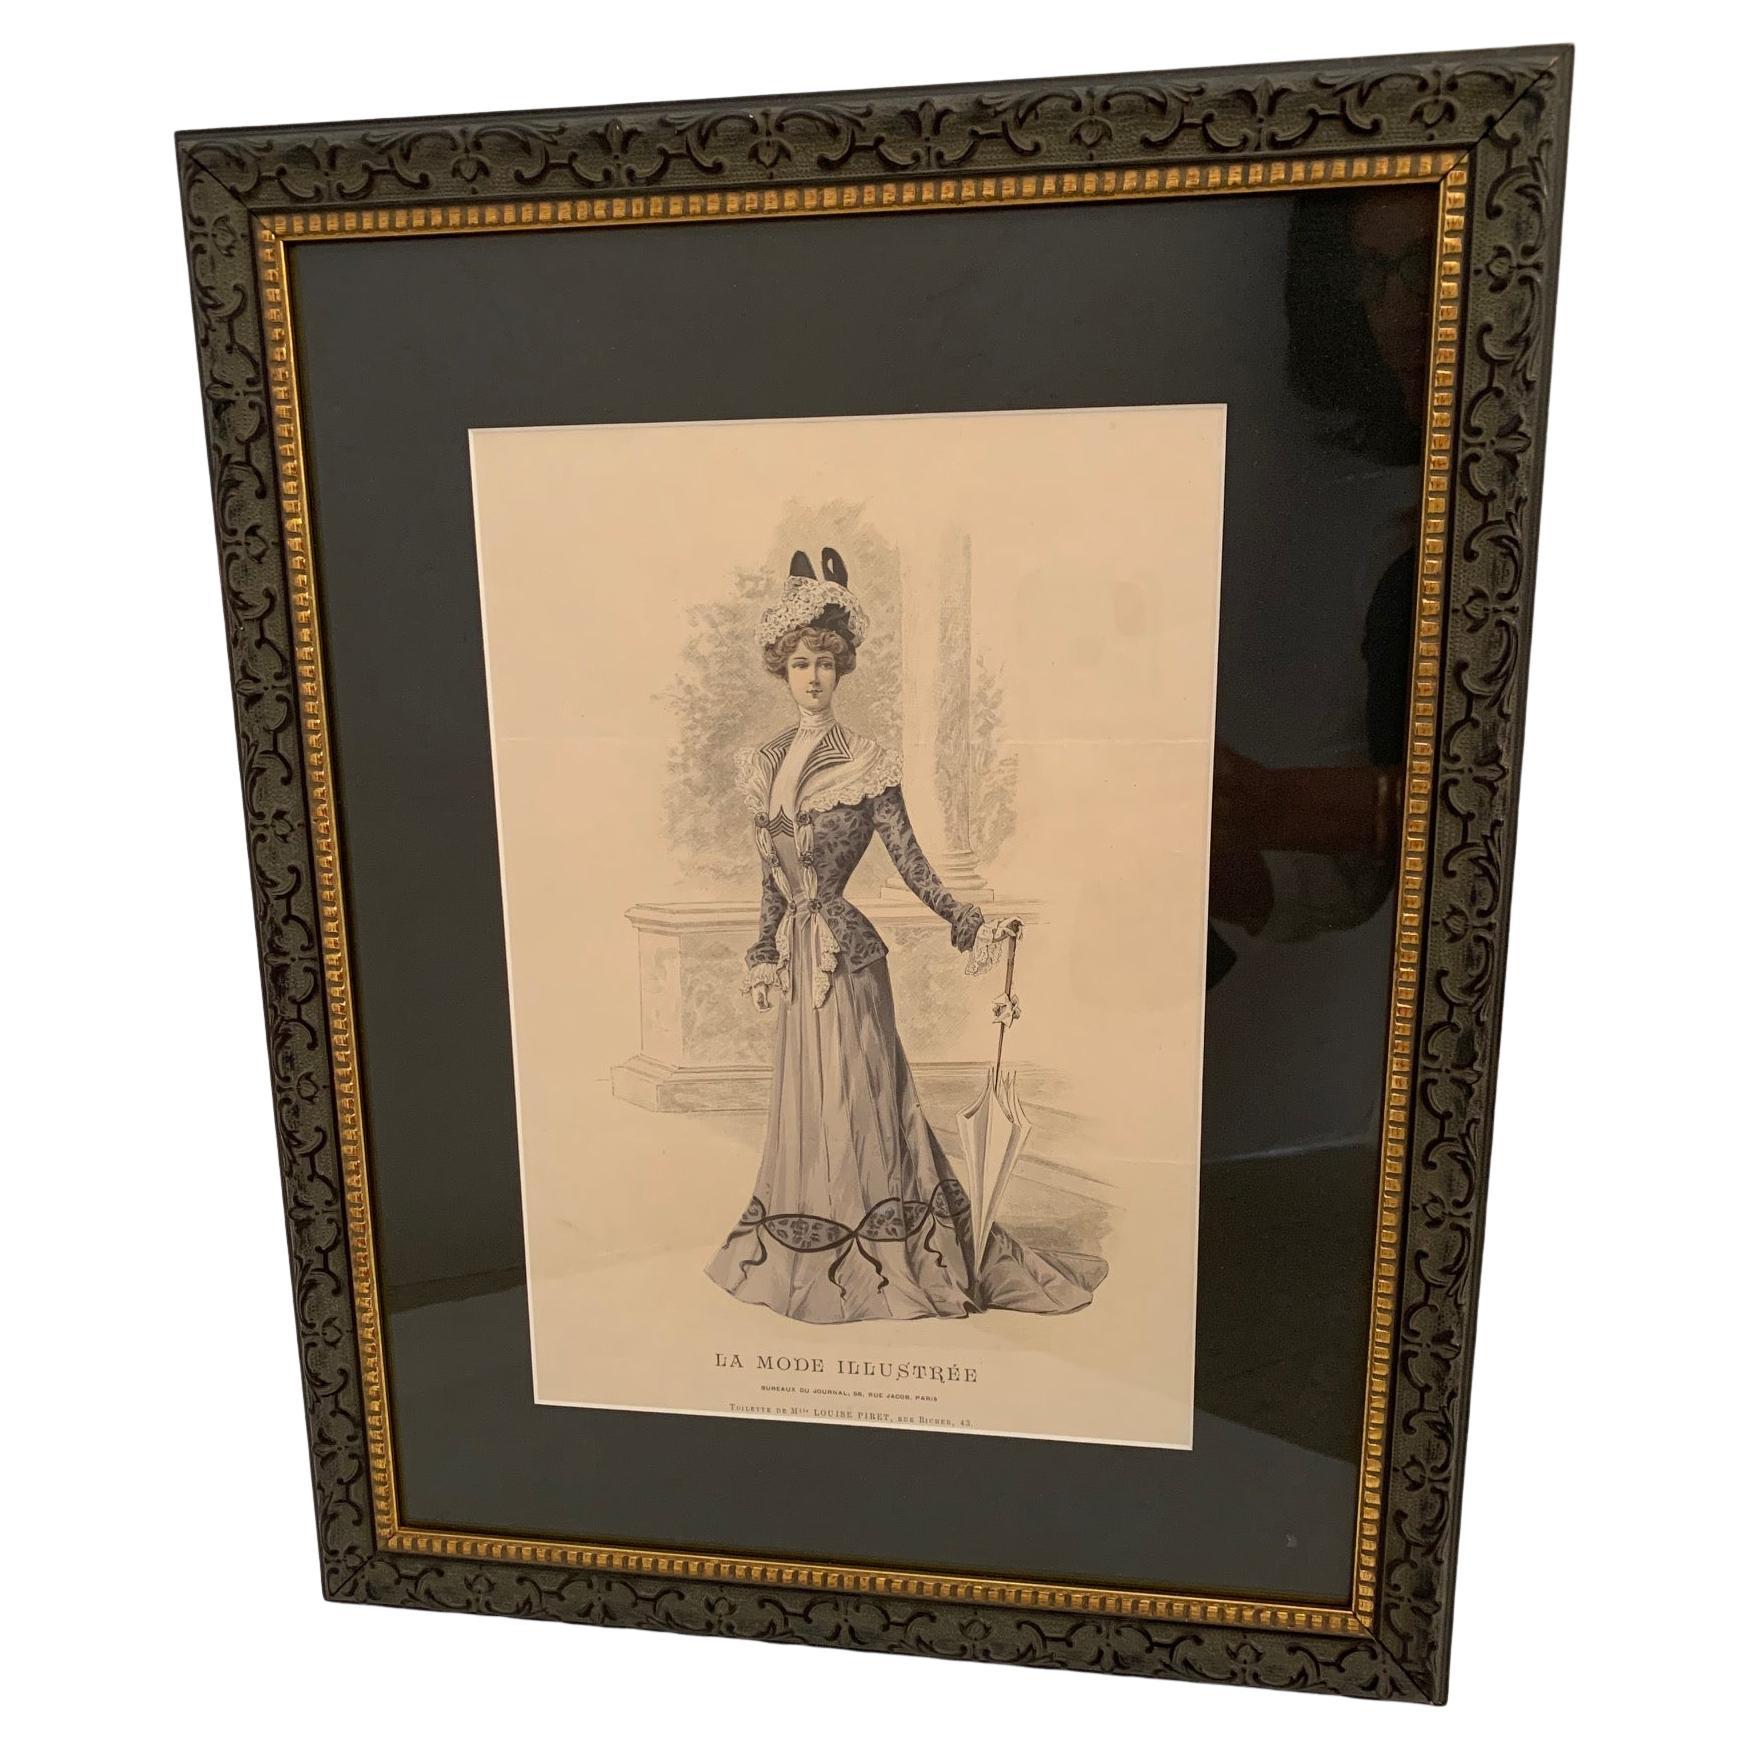 Lovely Black and White Engraving of Victorian Lady